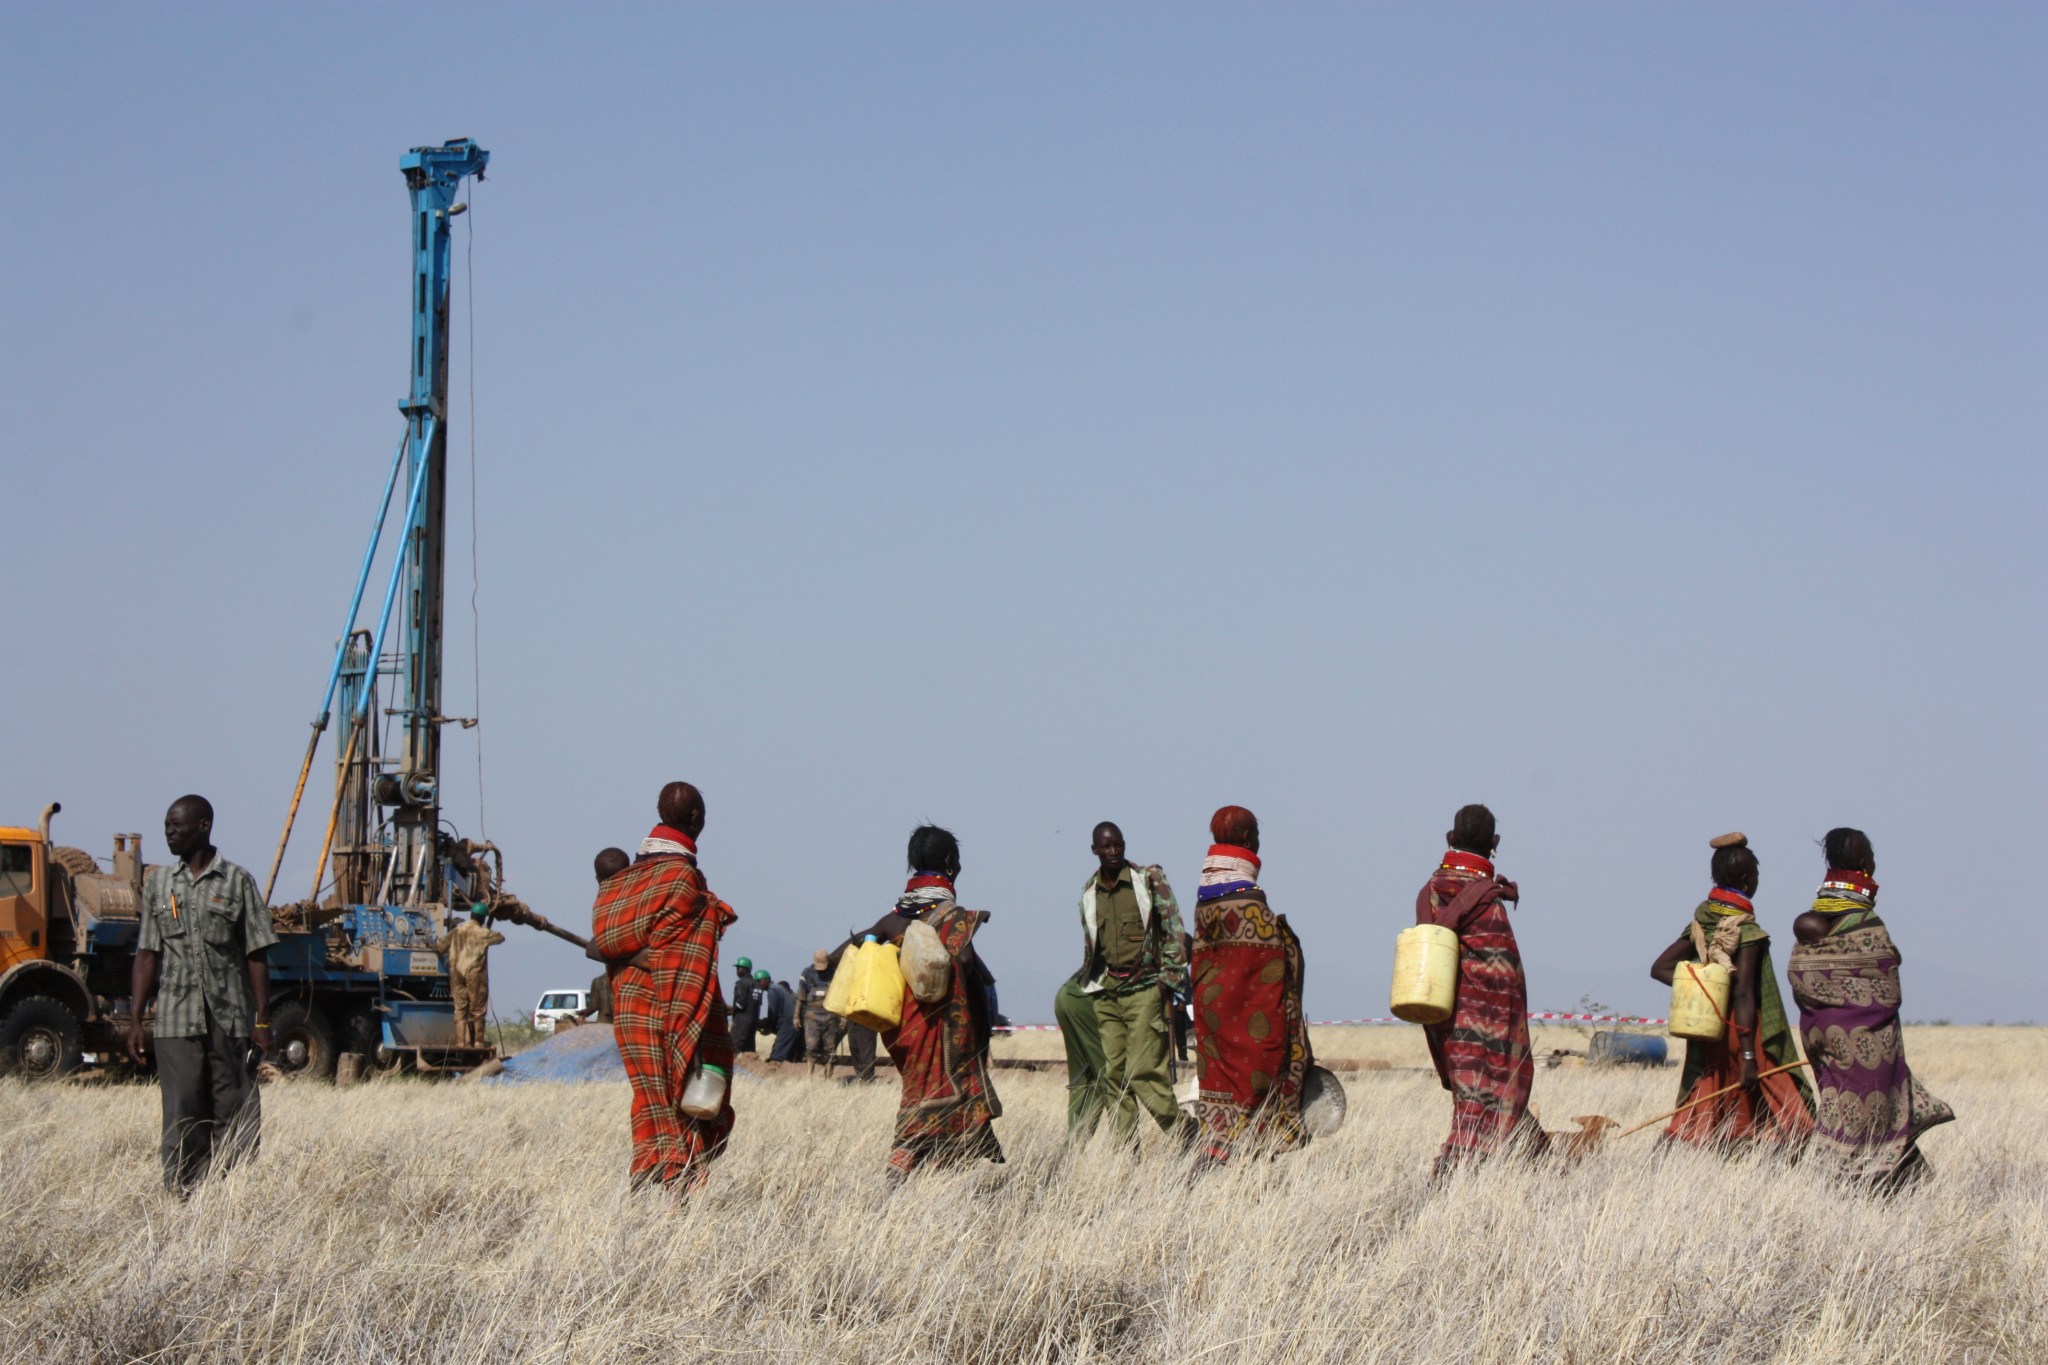 Turkana Women Retrieving Water from a Newly Drilled Well in the Lotikipi Basin